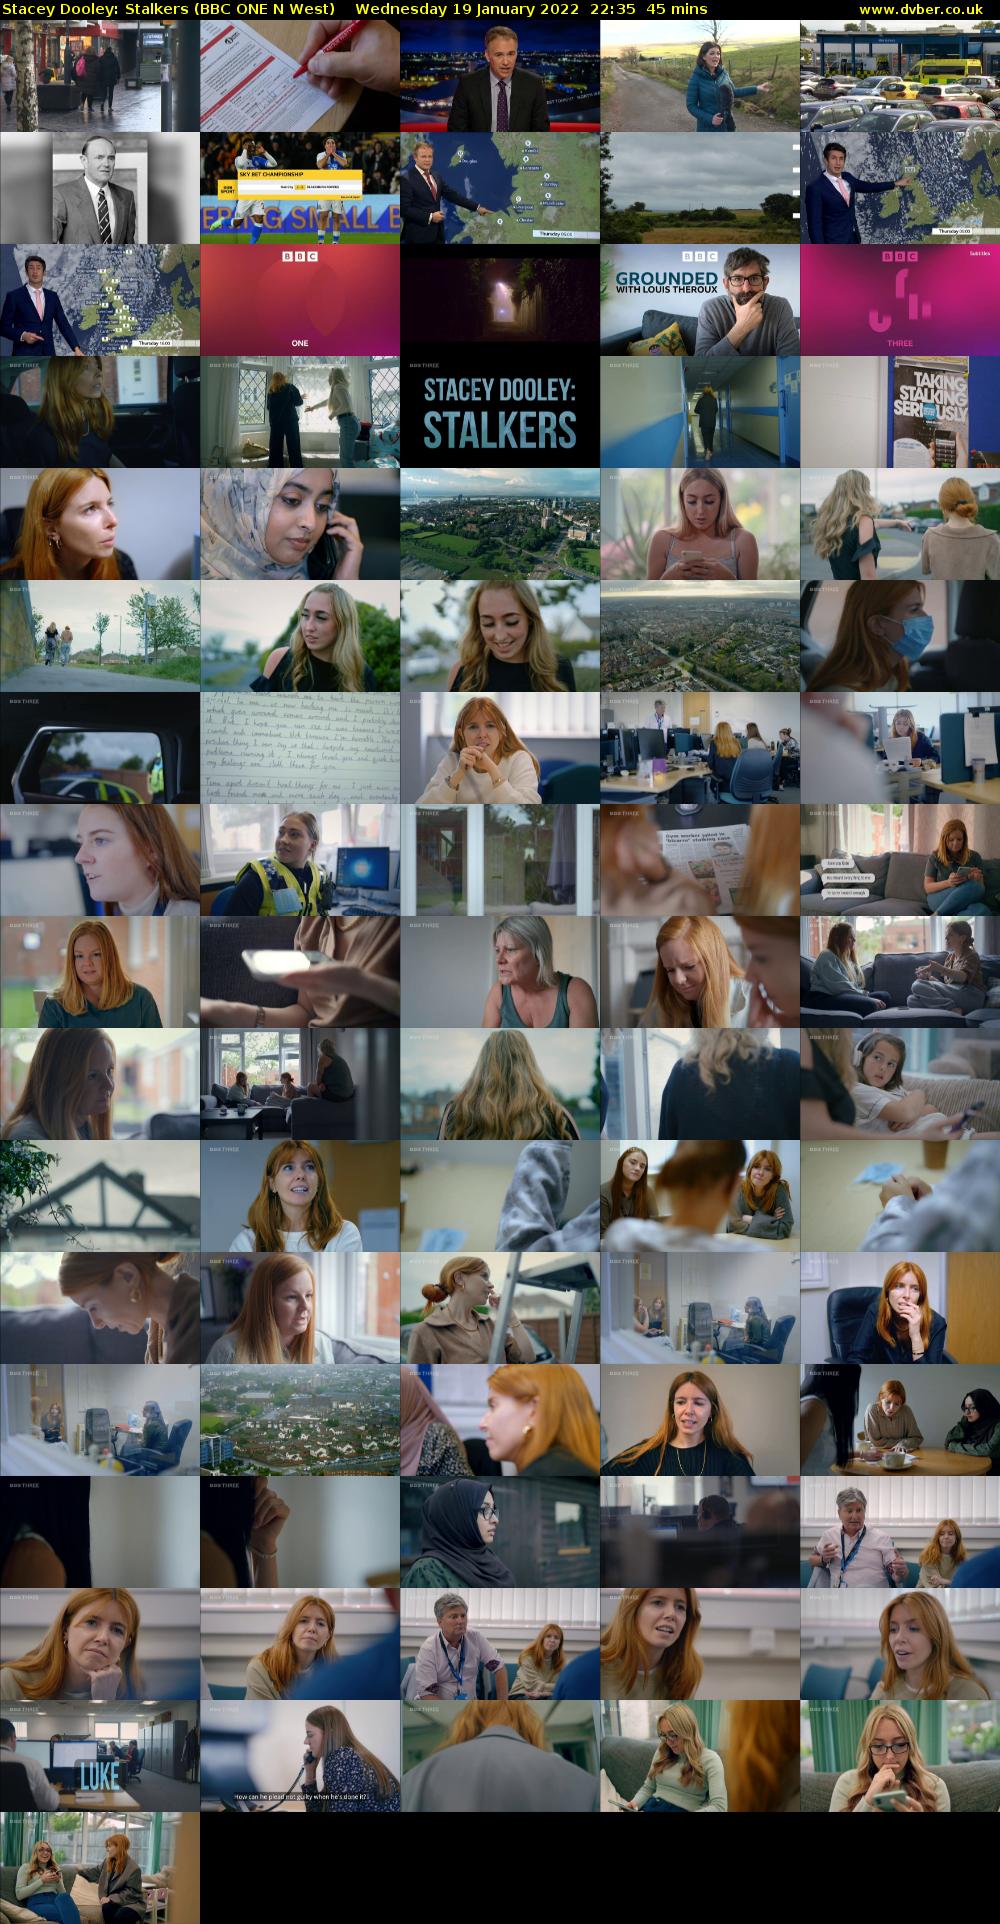 Stacey Dooley: Stalkers (BBC ONE N West) Wednesday 19 January 2022 22:35 - 23:20